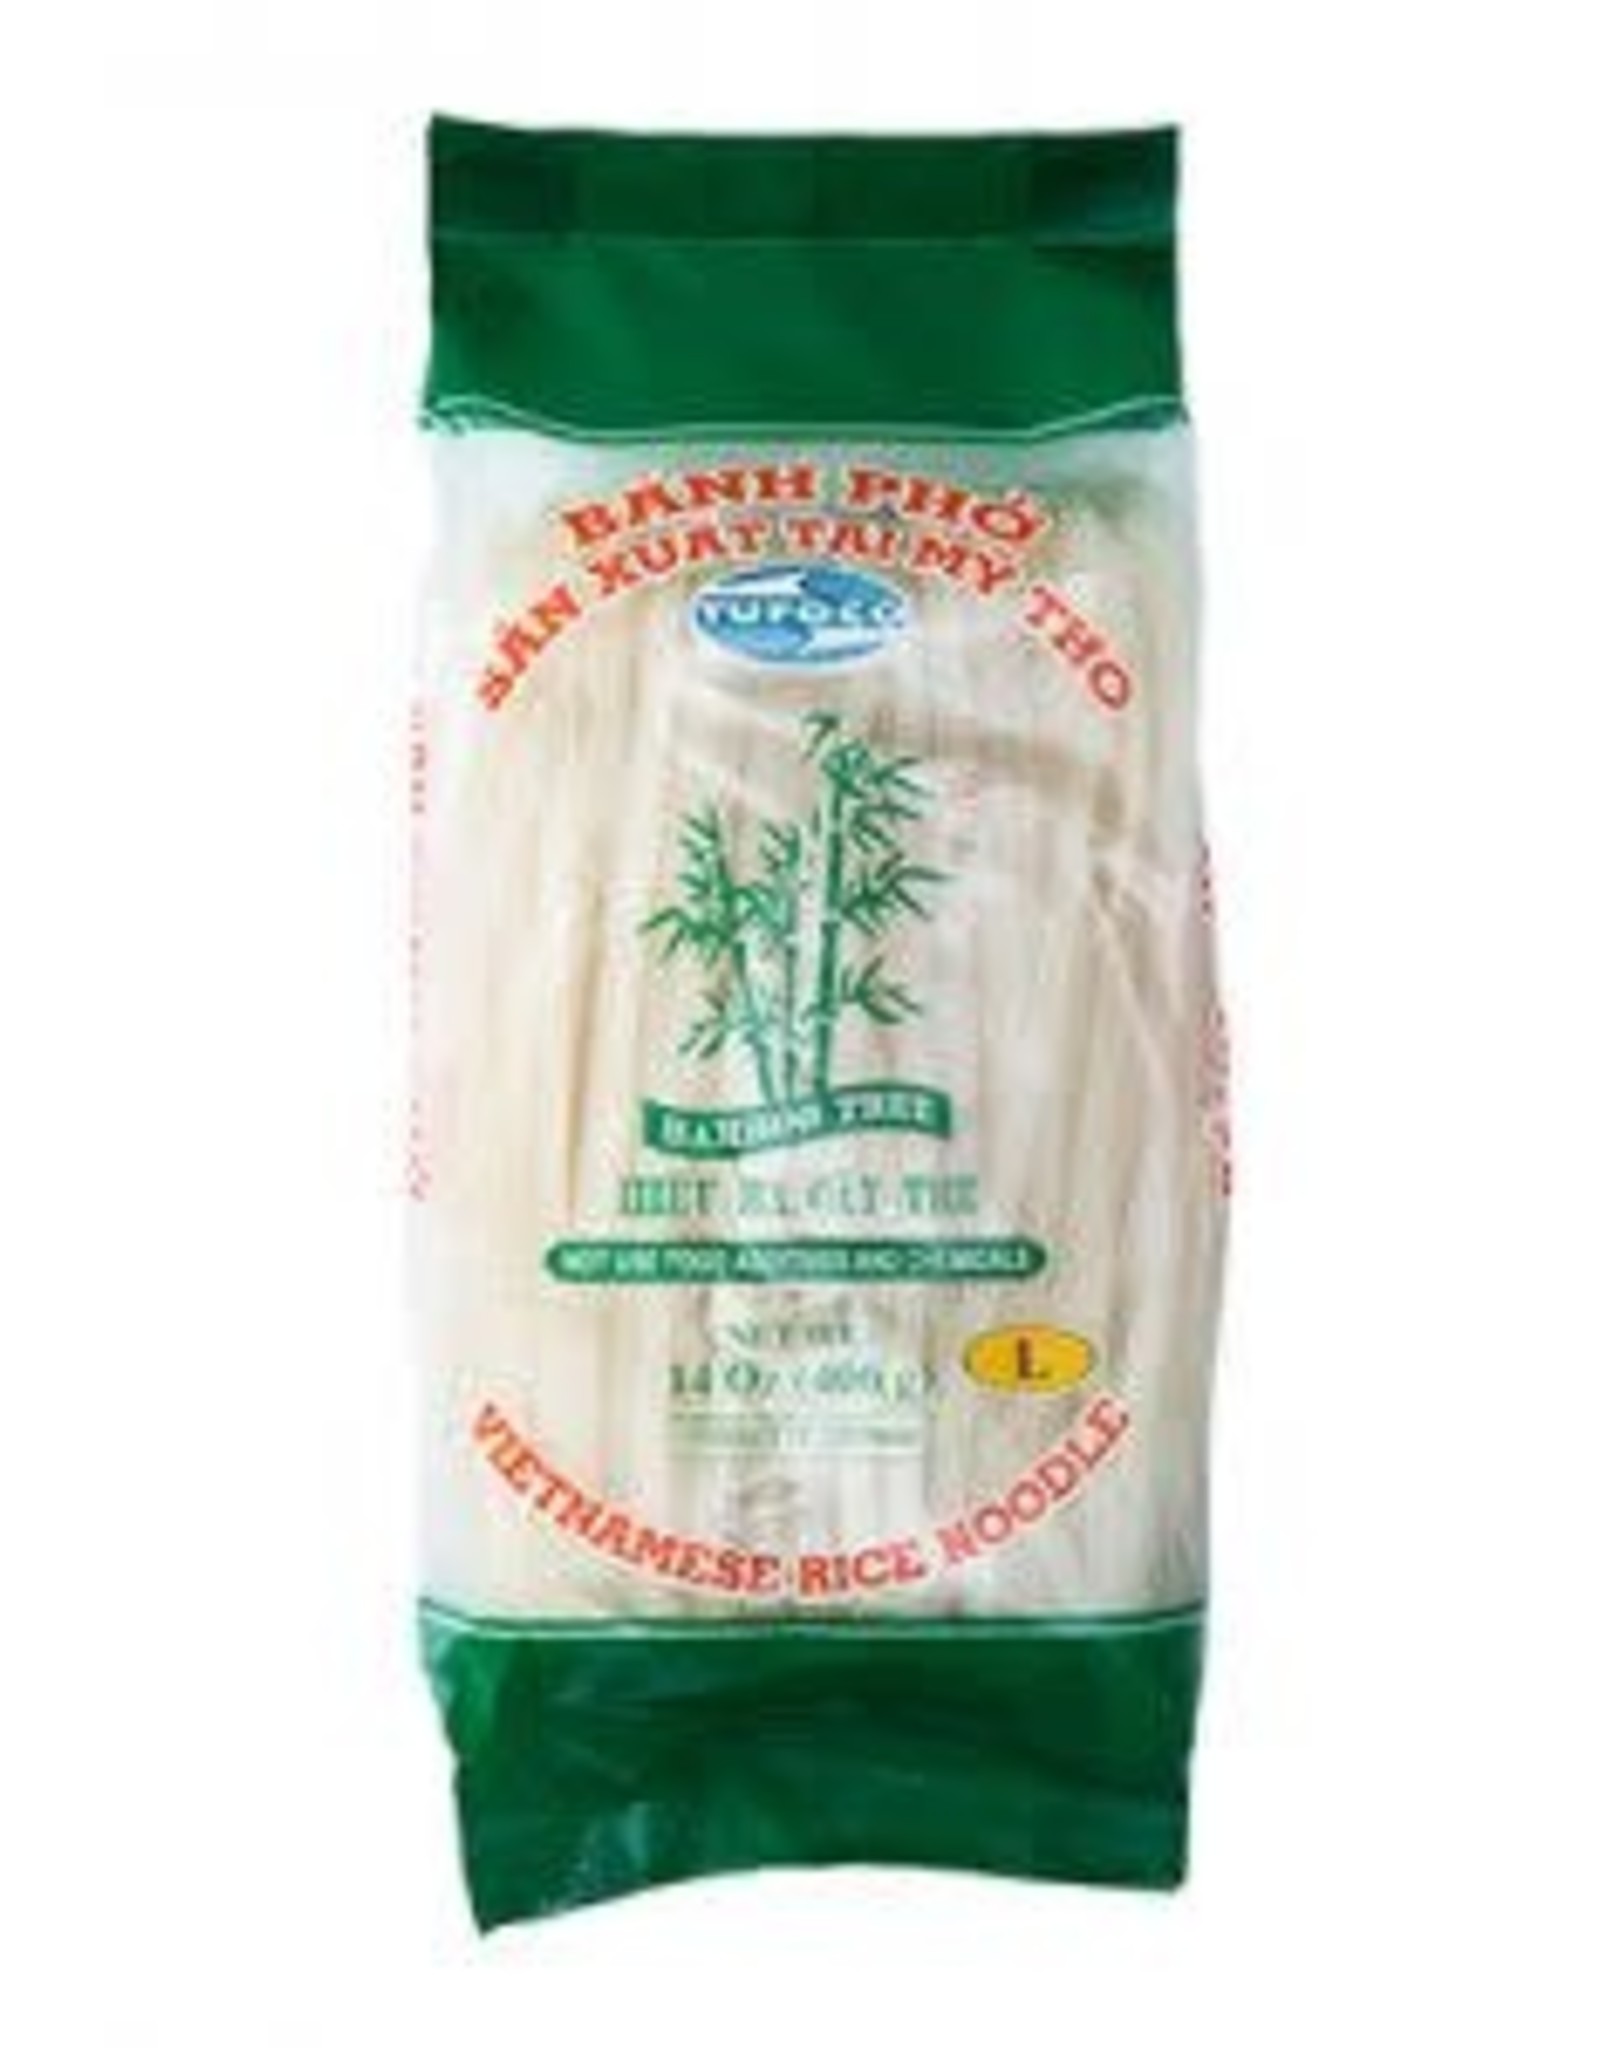 Rice Noodles 5 Mm 400 Gr  Bamboo Tree